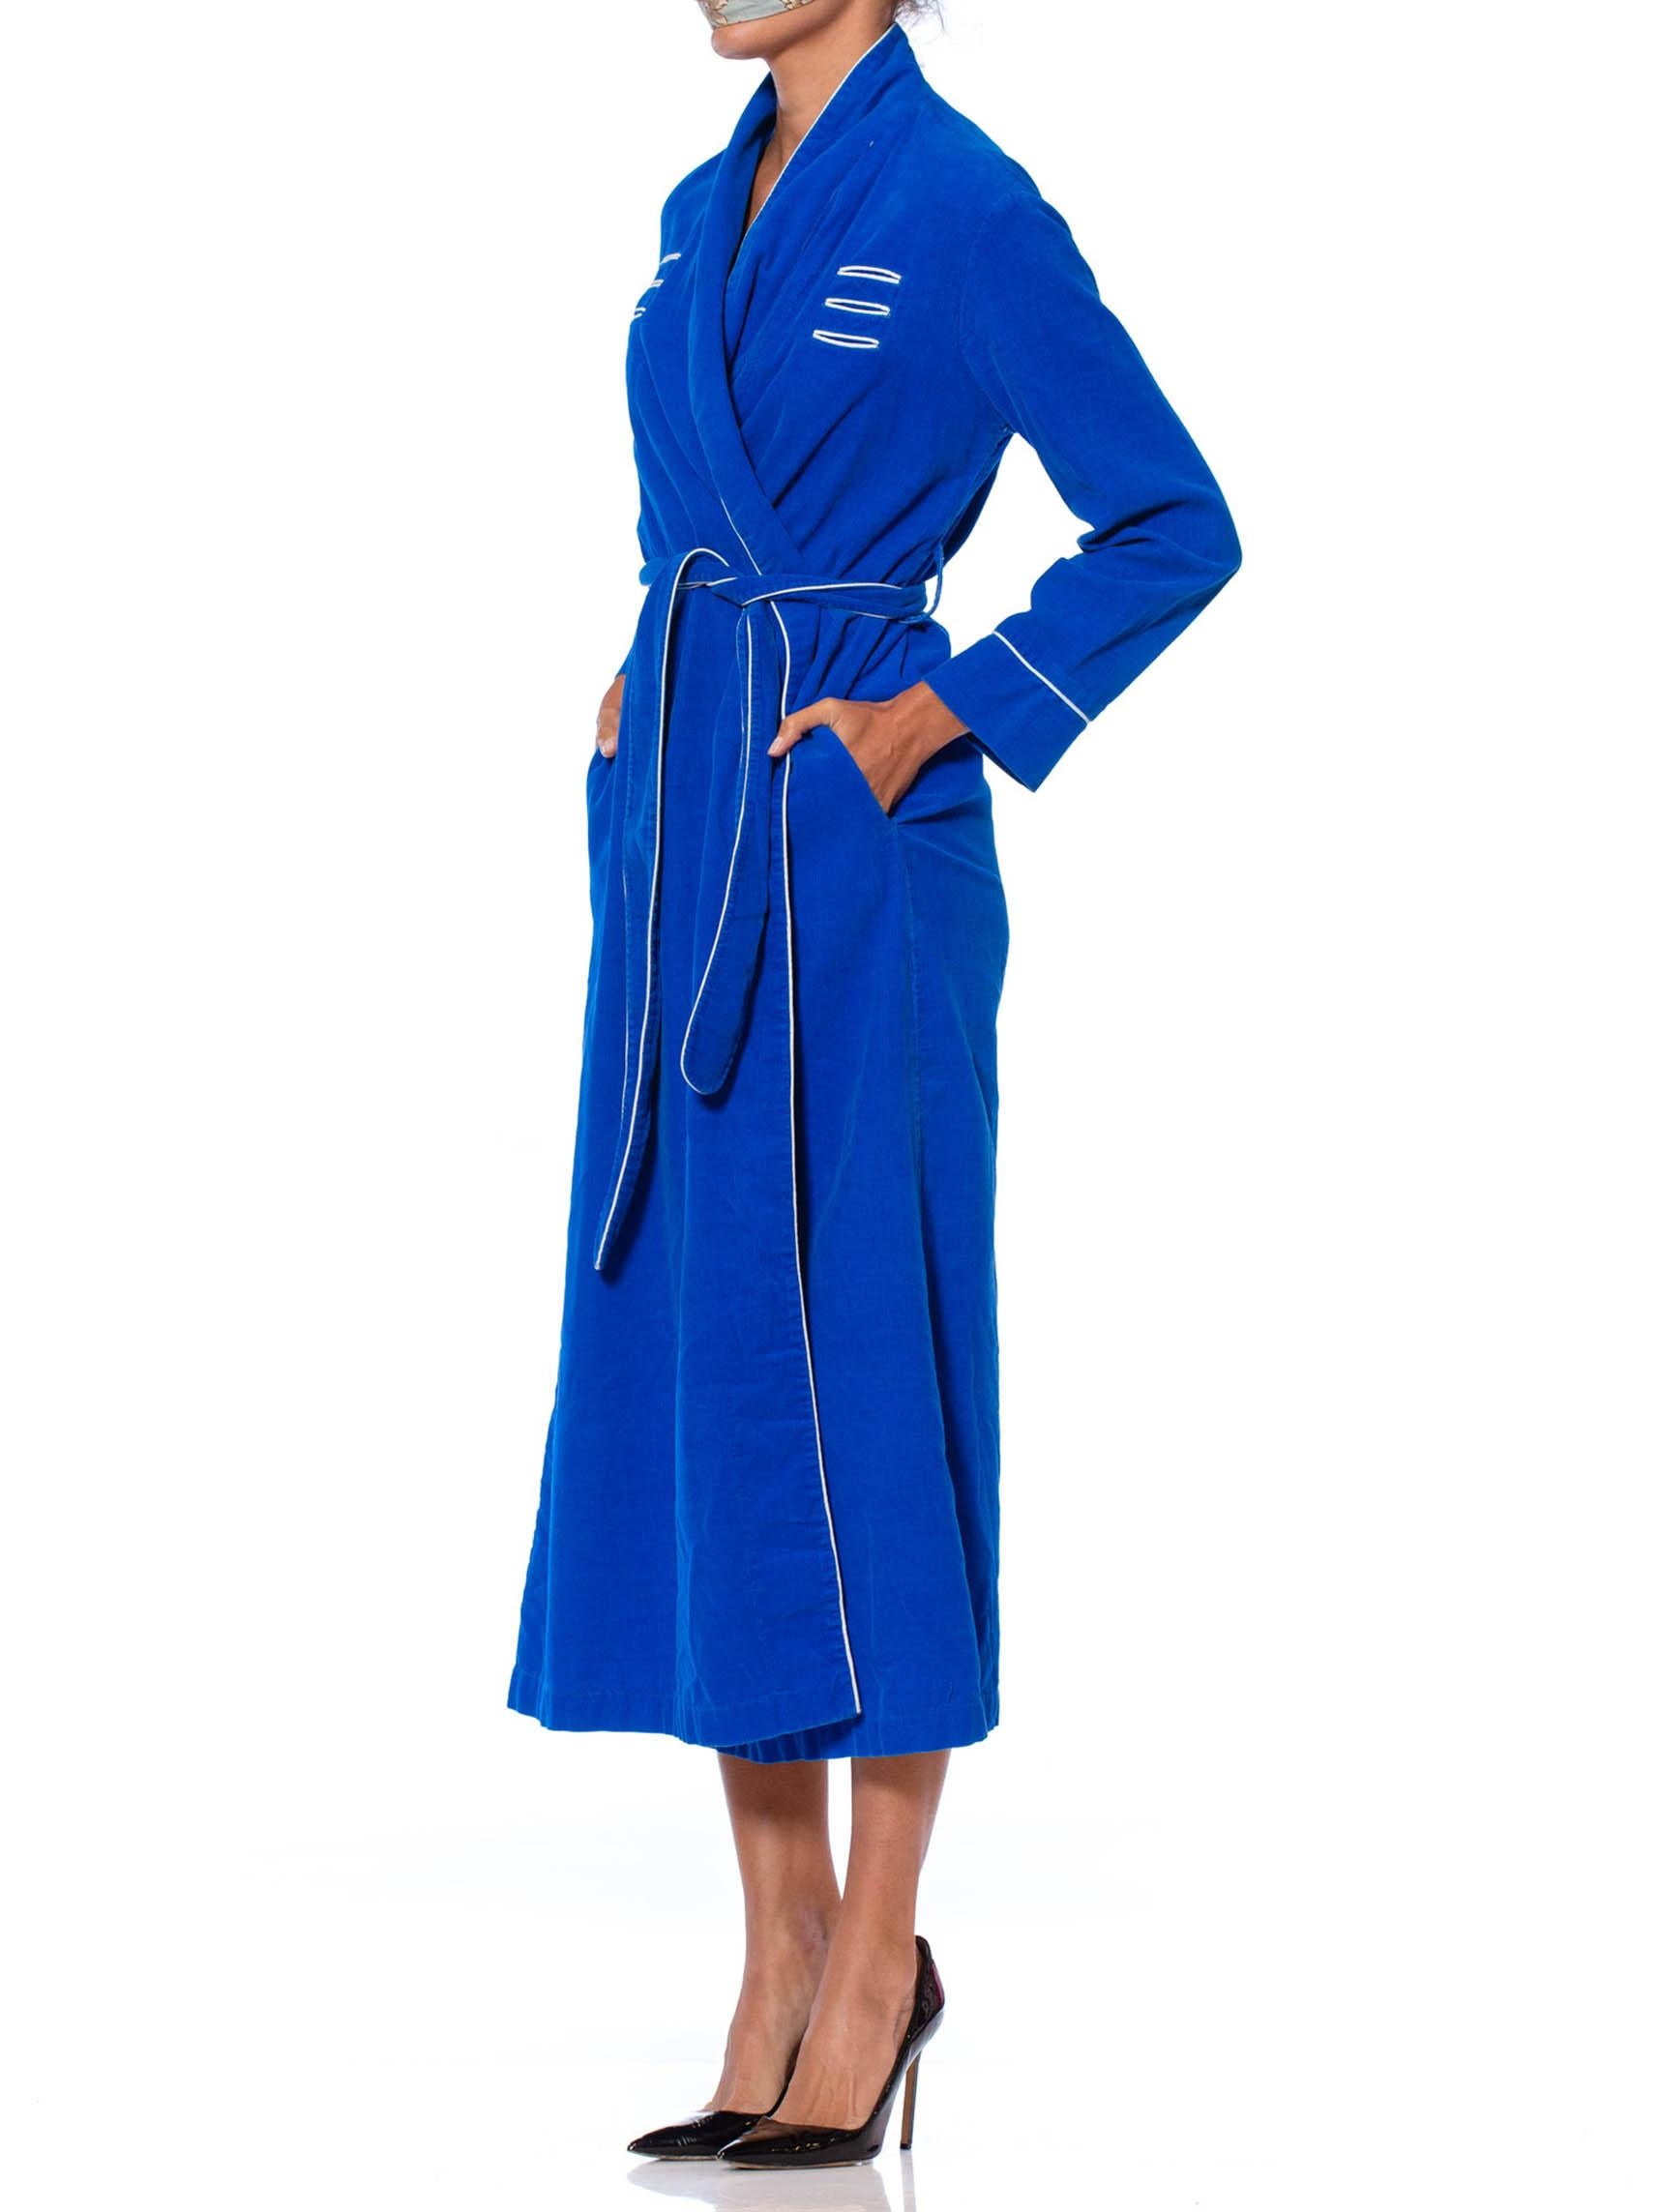 1950S Electric Blue Cotton Corduroy Robe With White Piping & Cute Pockets For Sale 1